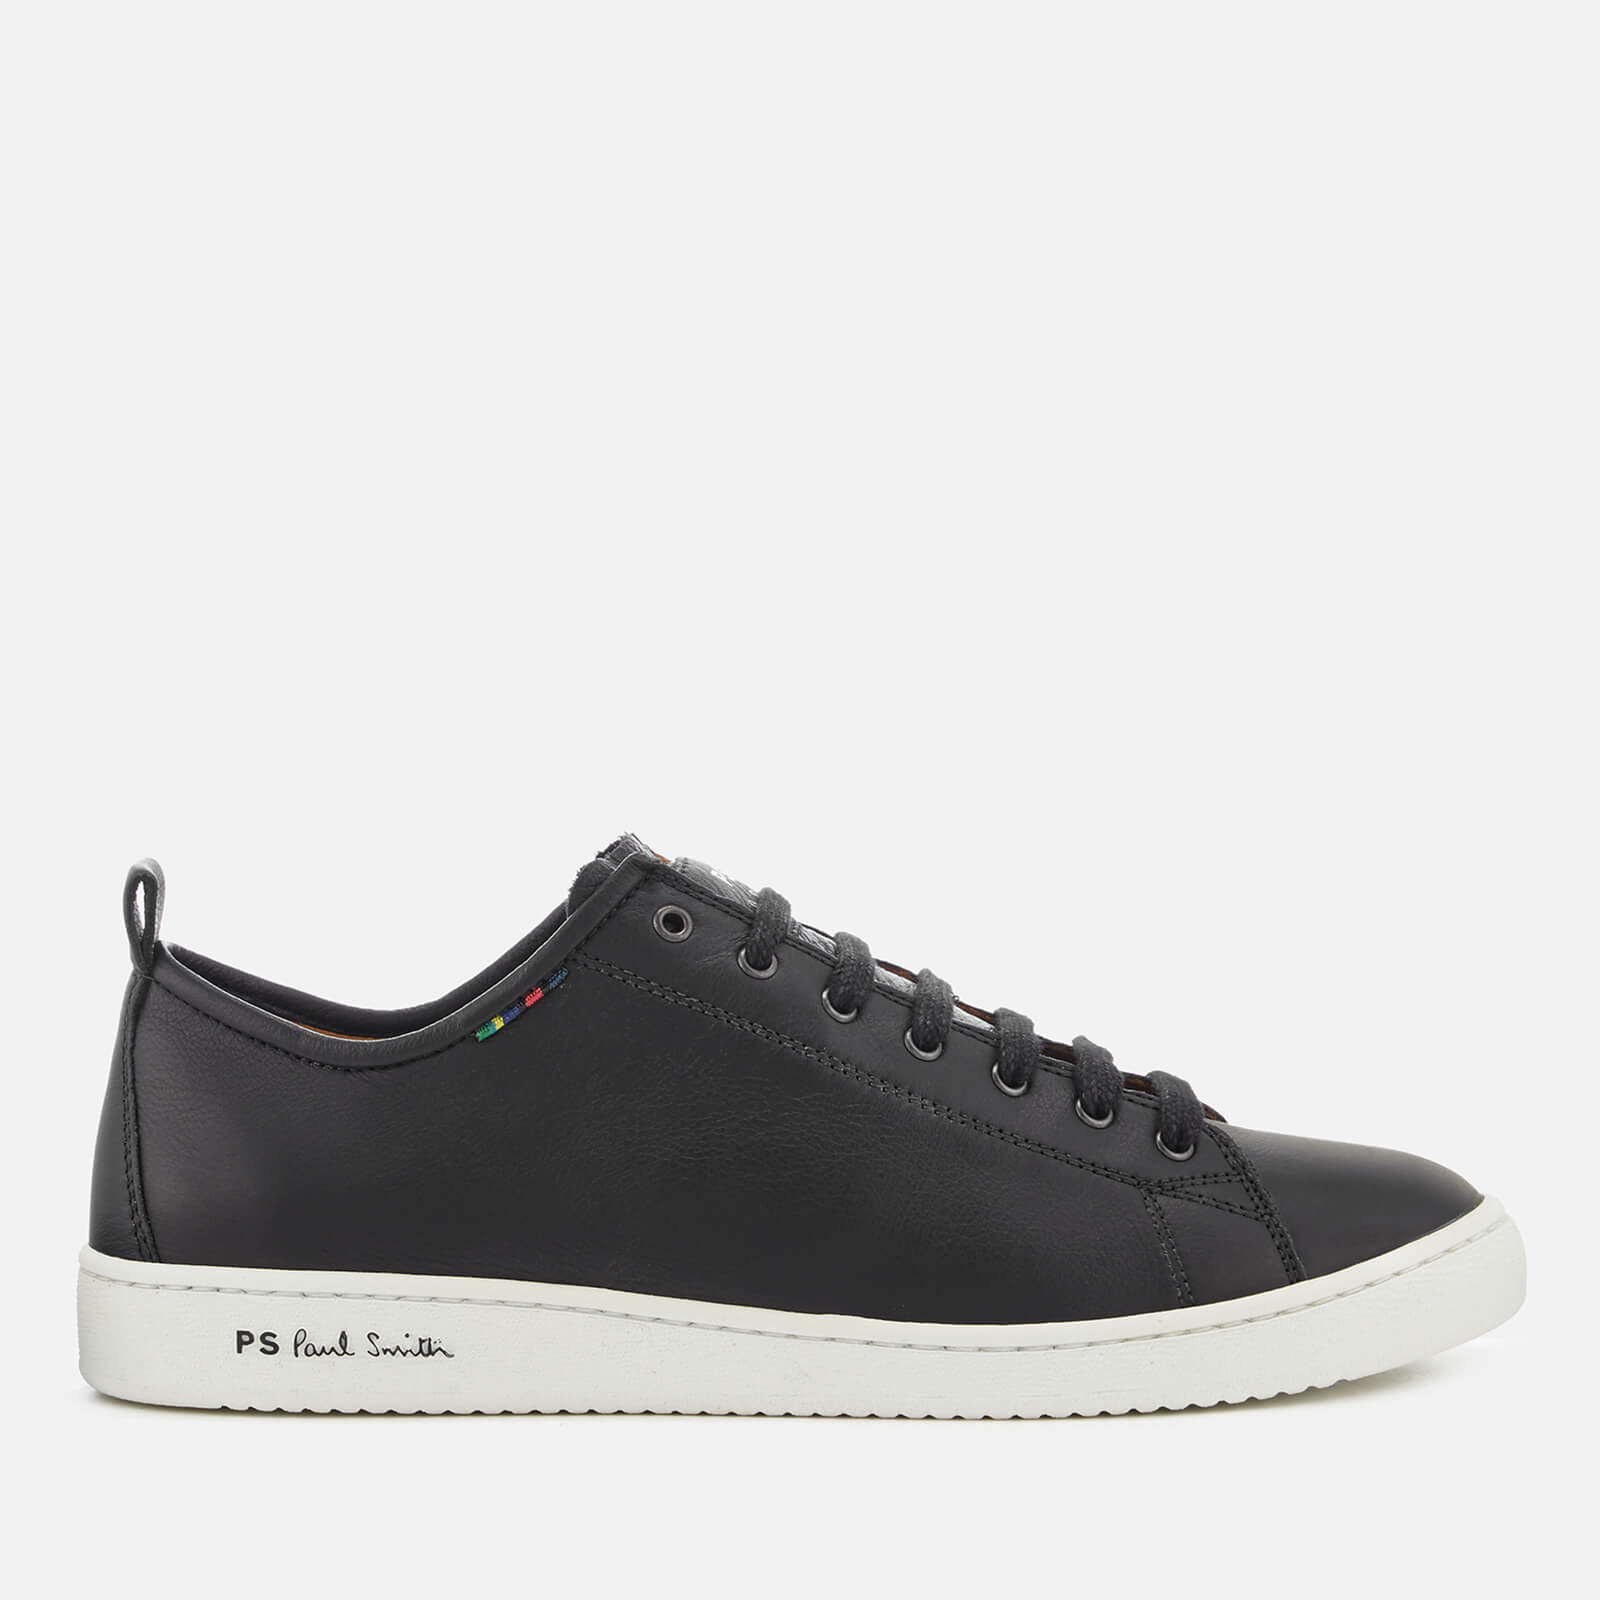 PS Paul Smith Men’s Miyata Leather Low Top Trainers - Black